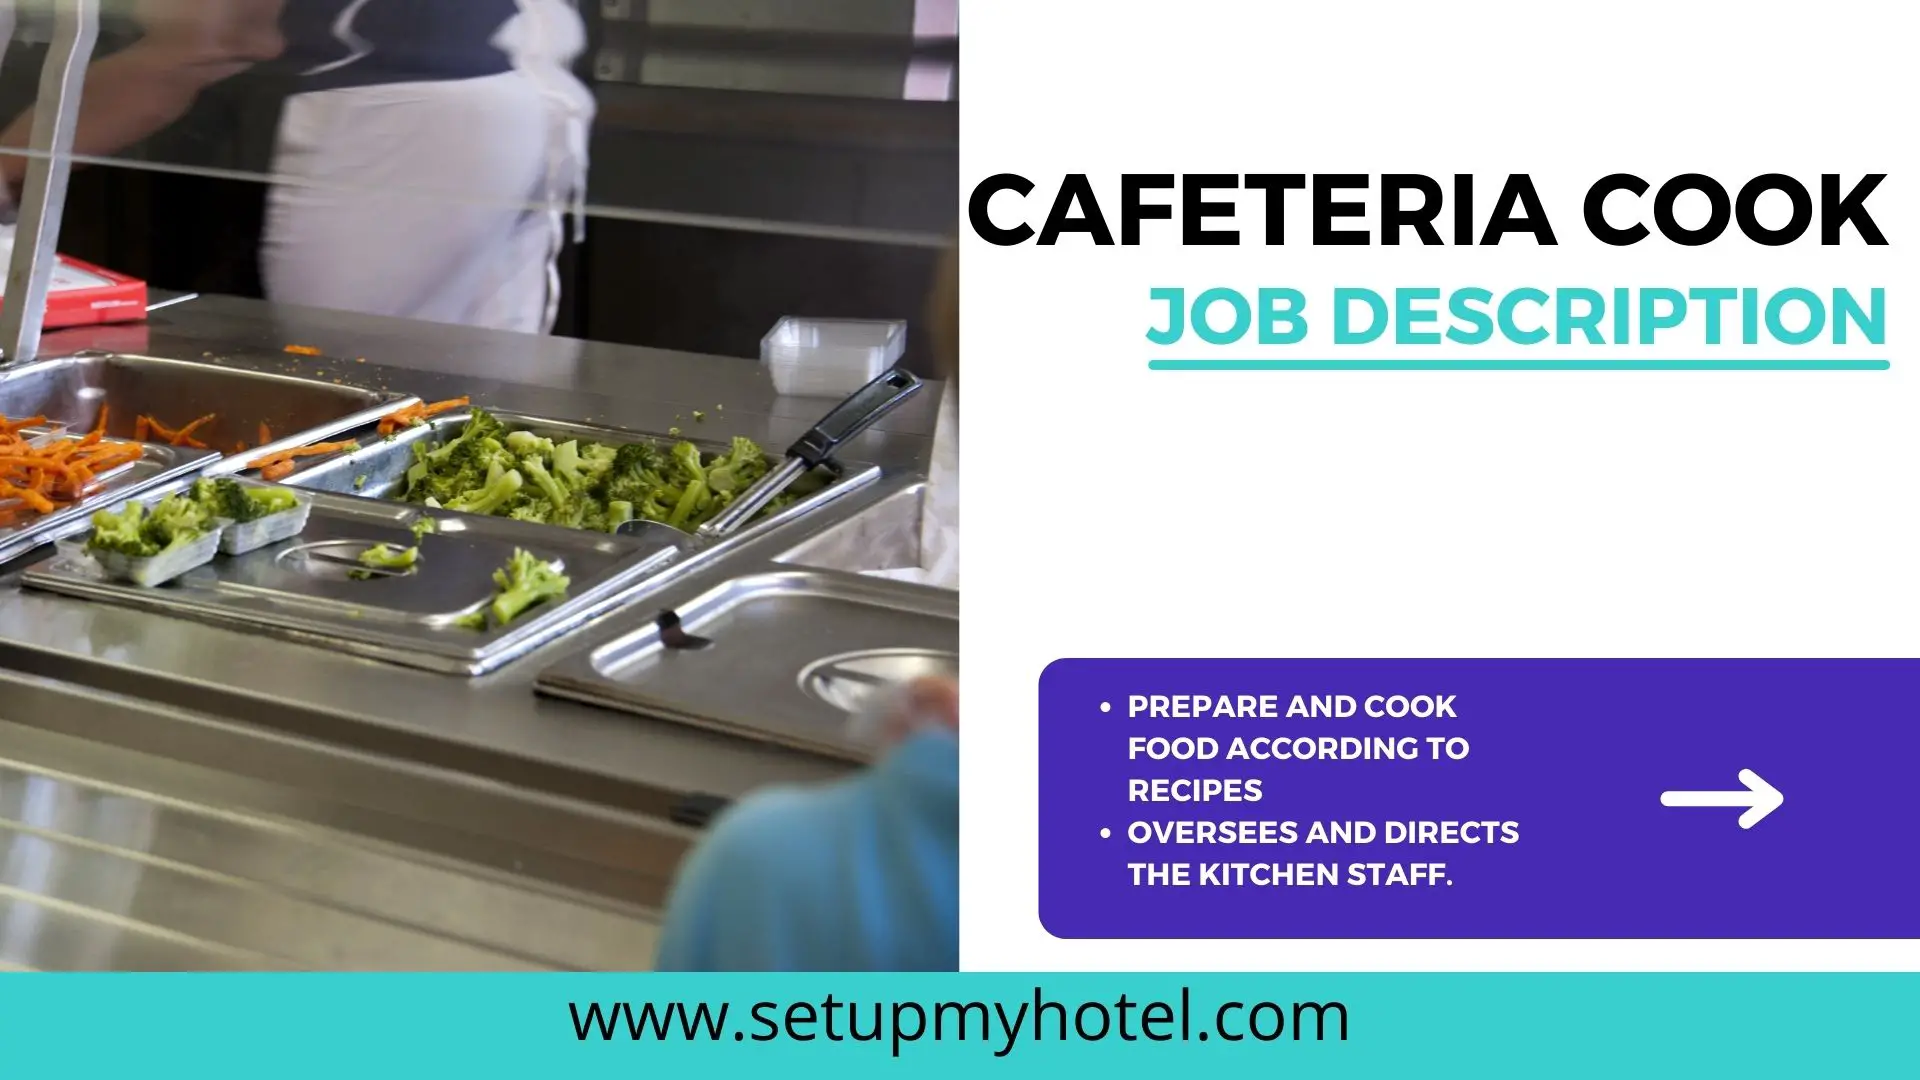 A cafeteria cook is responsible for preparing and cooking meals in a cafeteria or other food service establishment. The cook must be able to work in a fast-paced environment and handle multiple tasks at once. The job requires a high level of skill and expertise in food preparation and cooking techniques, as well as knowledge of food safety and sanitation practices. The main responsibilities of a cafeteria cook include planning and preparing menus, ordering and stocking supplies, and supervising kitchen staff. The cook must also ensure that the kitchen and dining area are kept clean and organized, and that all food is prepared and served in a safe and hygienic manner. To be successful in this role, the cafeteria cook must have excellent communication skills and be able to work well as part of a team. They must also be able to multitask and work efficiently under pressure. Additionally, the cook must be knowledgeable about different types of cuisine and be able to adapt recipes to meet the needs of different dietary restrictions and preferences. Overall, the cafeteria cook plays a vital role in ensuring that the cafeteria runs smoothly and that all customers are satisfied with their meals. If you have a passion for cooking and enjoy working in a dynamic environment, this may be the perfect job for you.